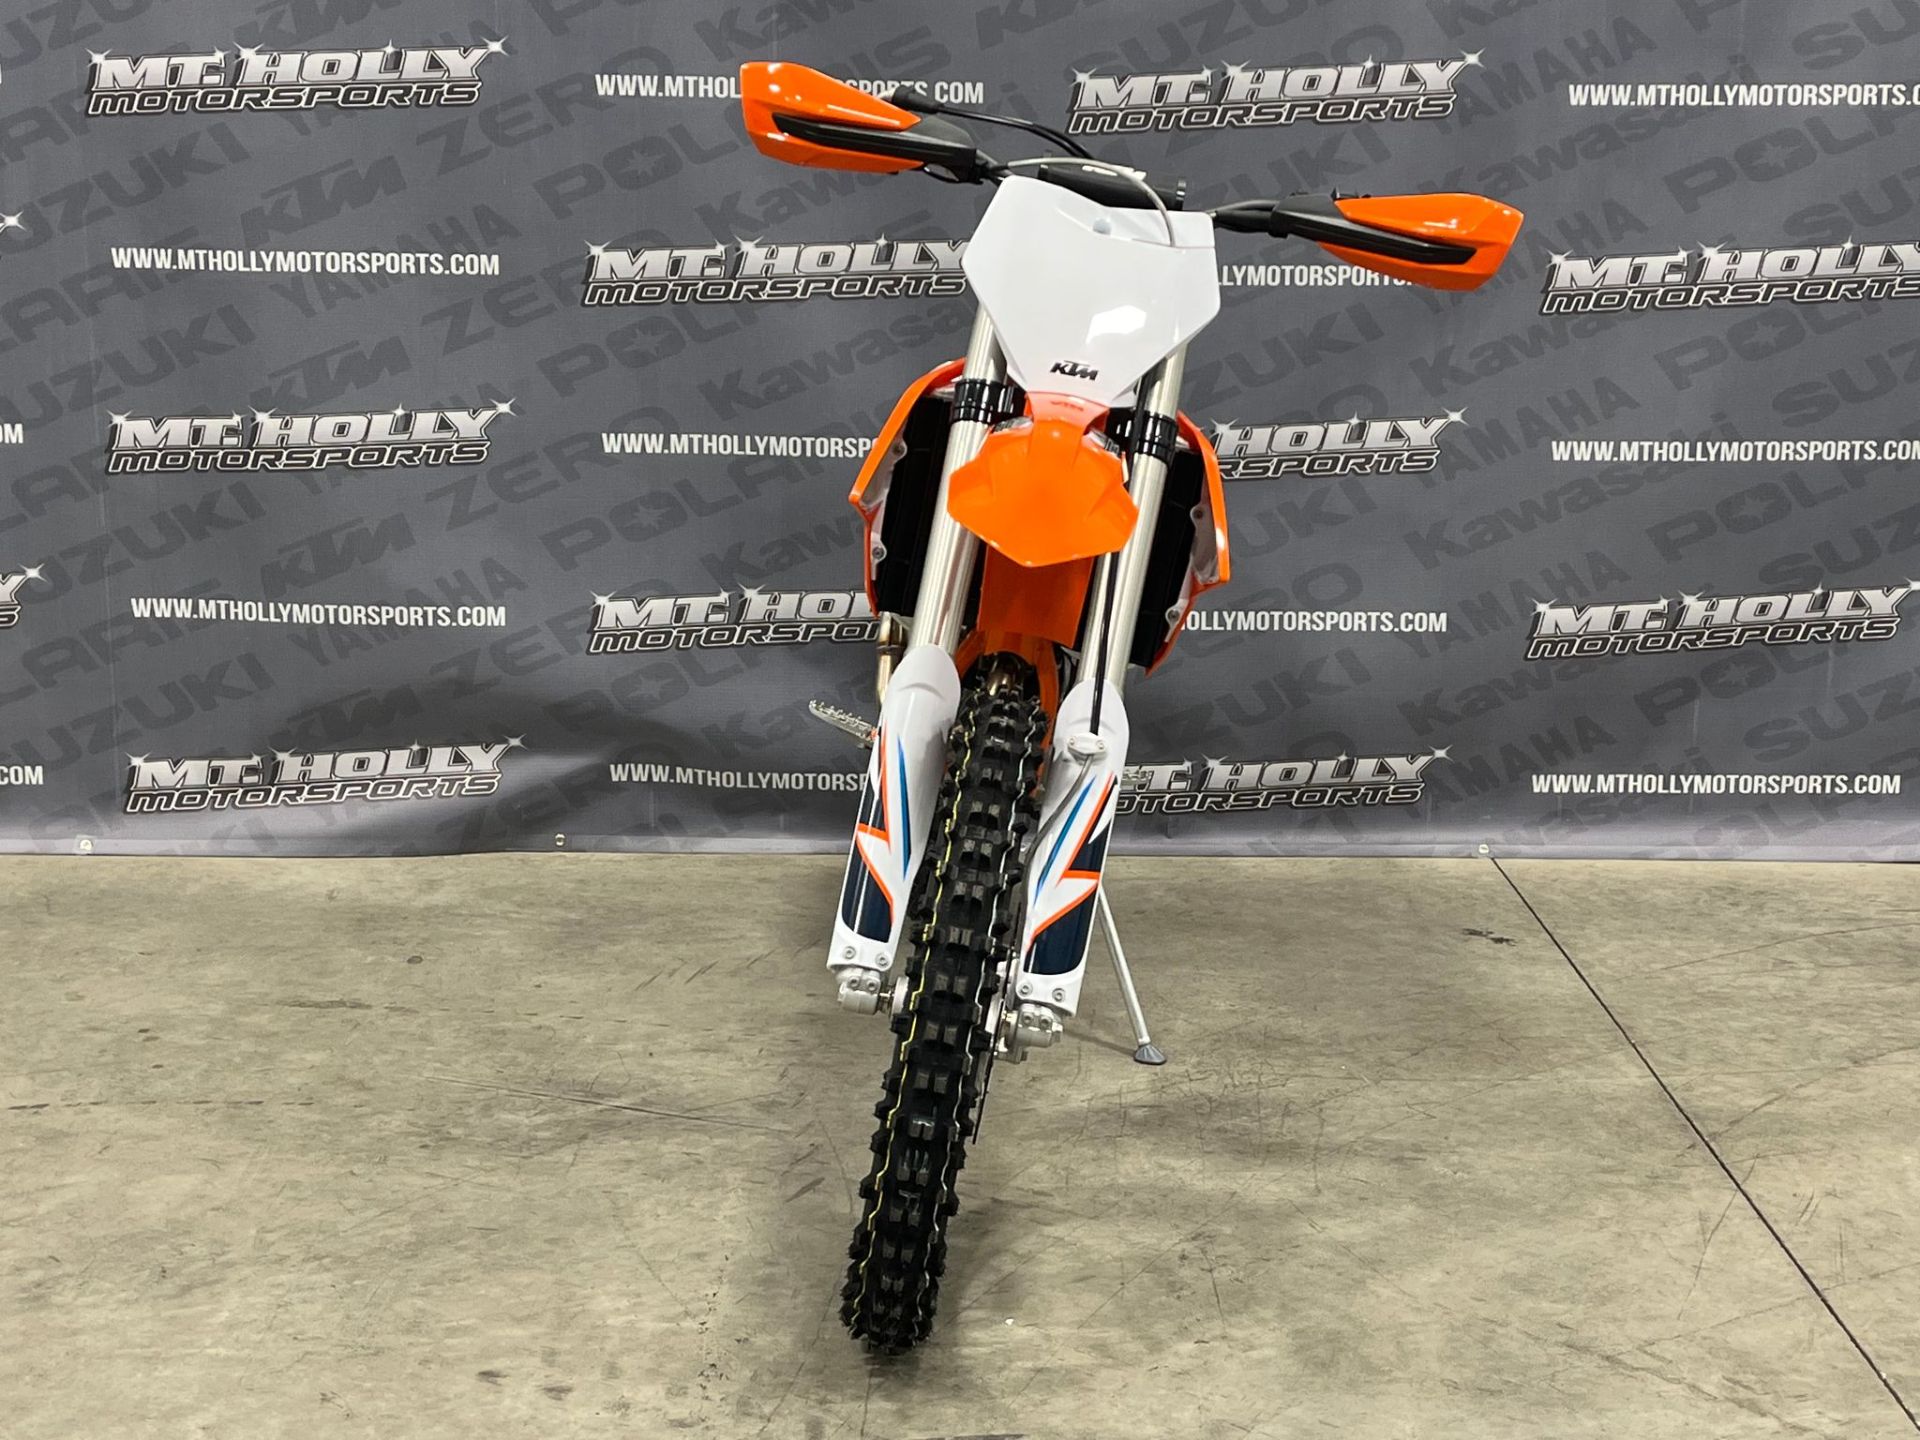 2022 KTM 250 XC-F in Vincentown, New Jersey - Photo 2